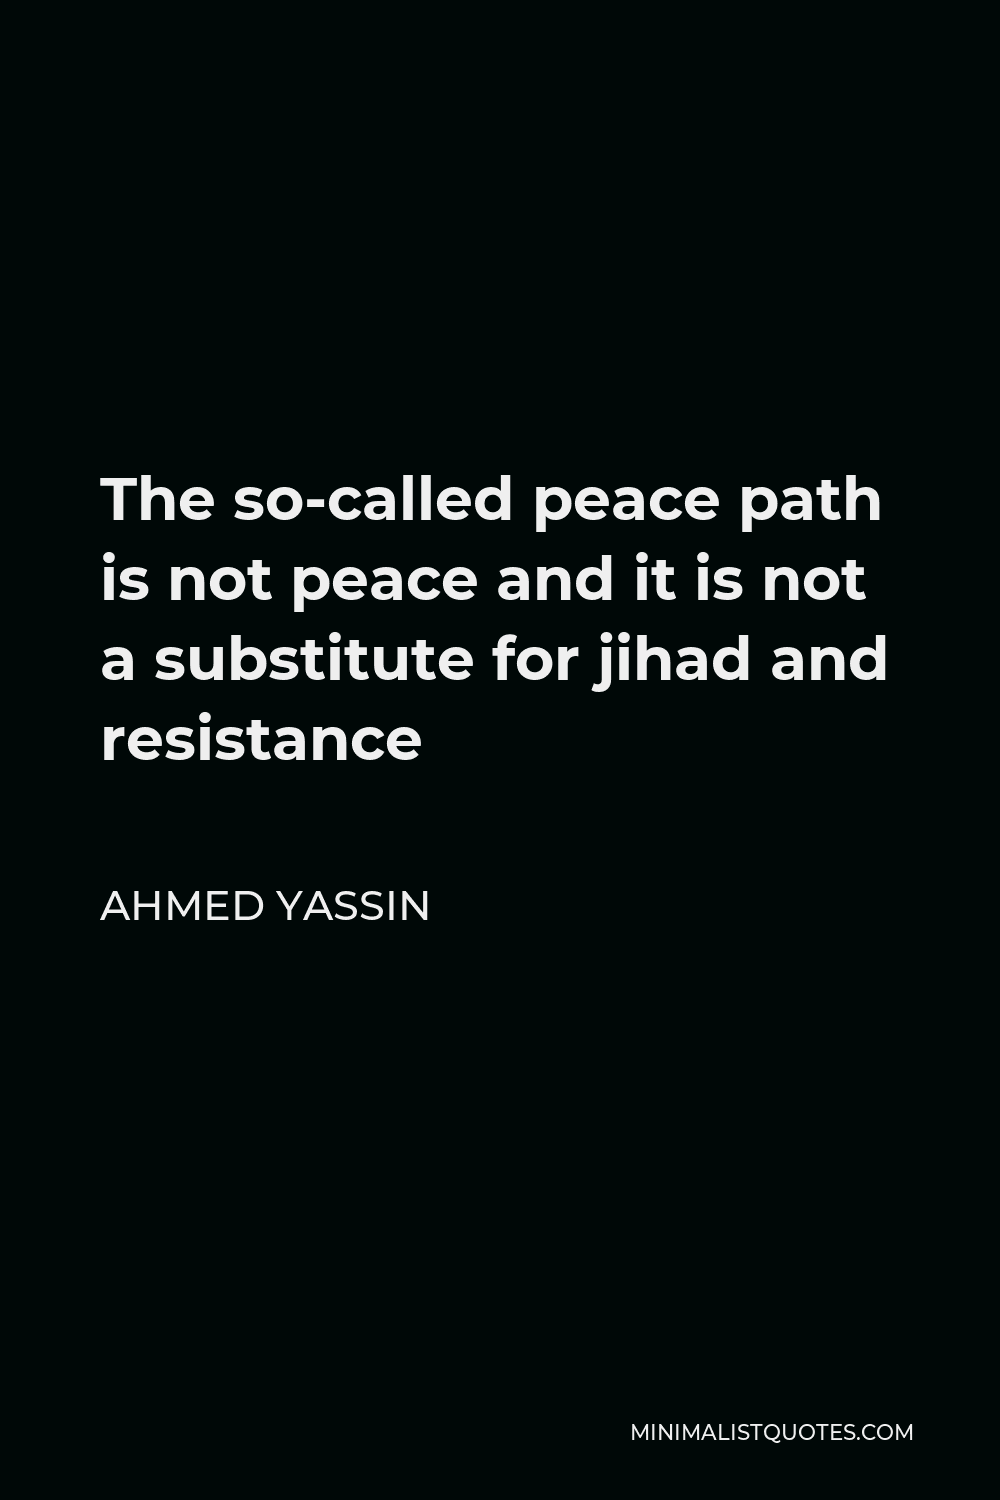 Ahmed Yassin Quote - The so-called peace path is not peace and it is not a substitute for jihad and resistance